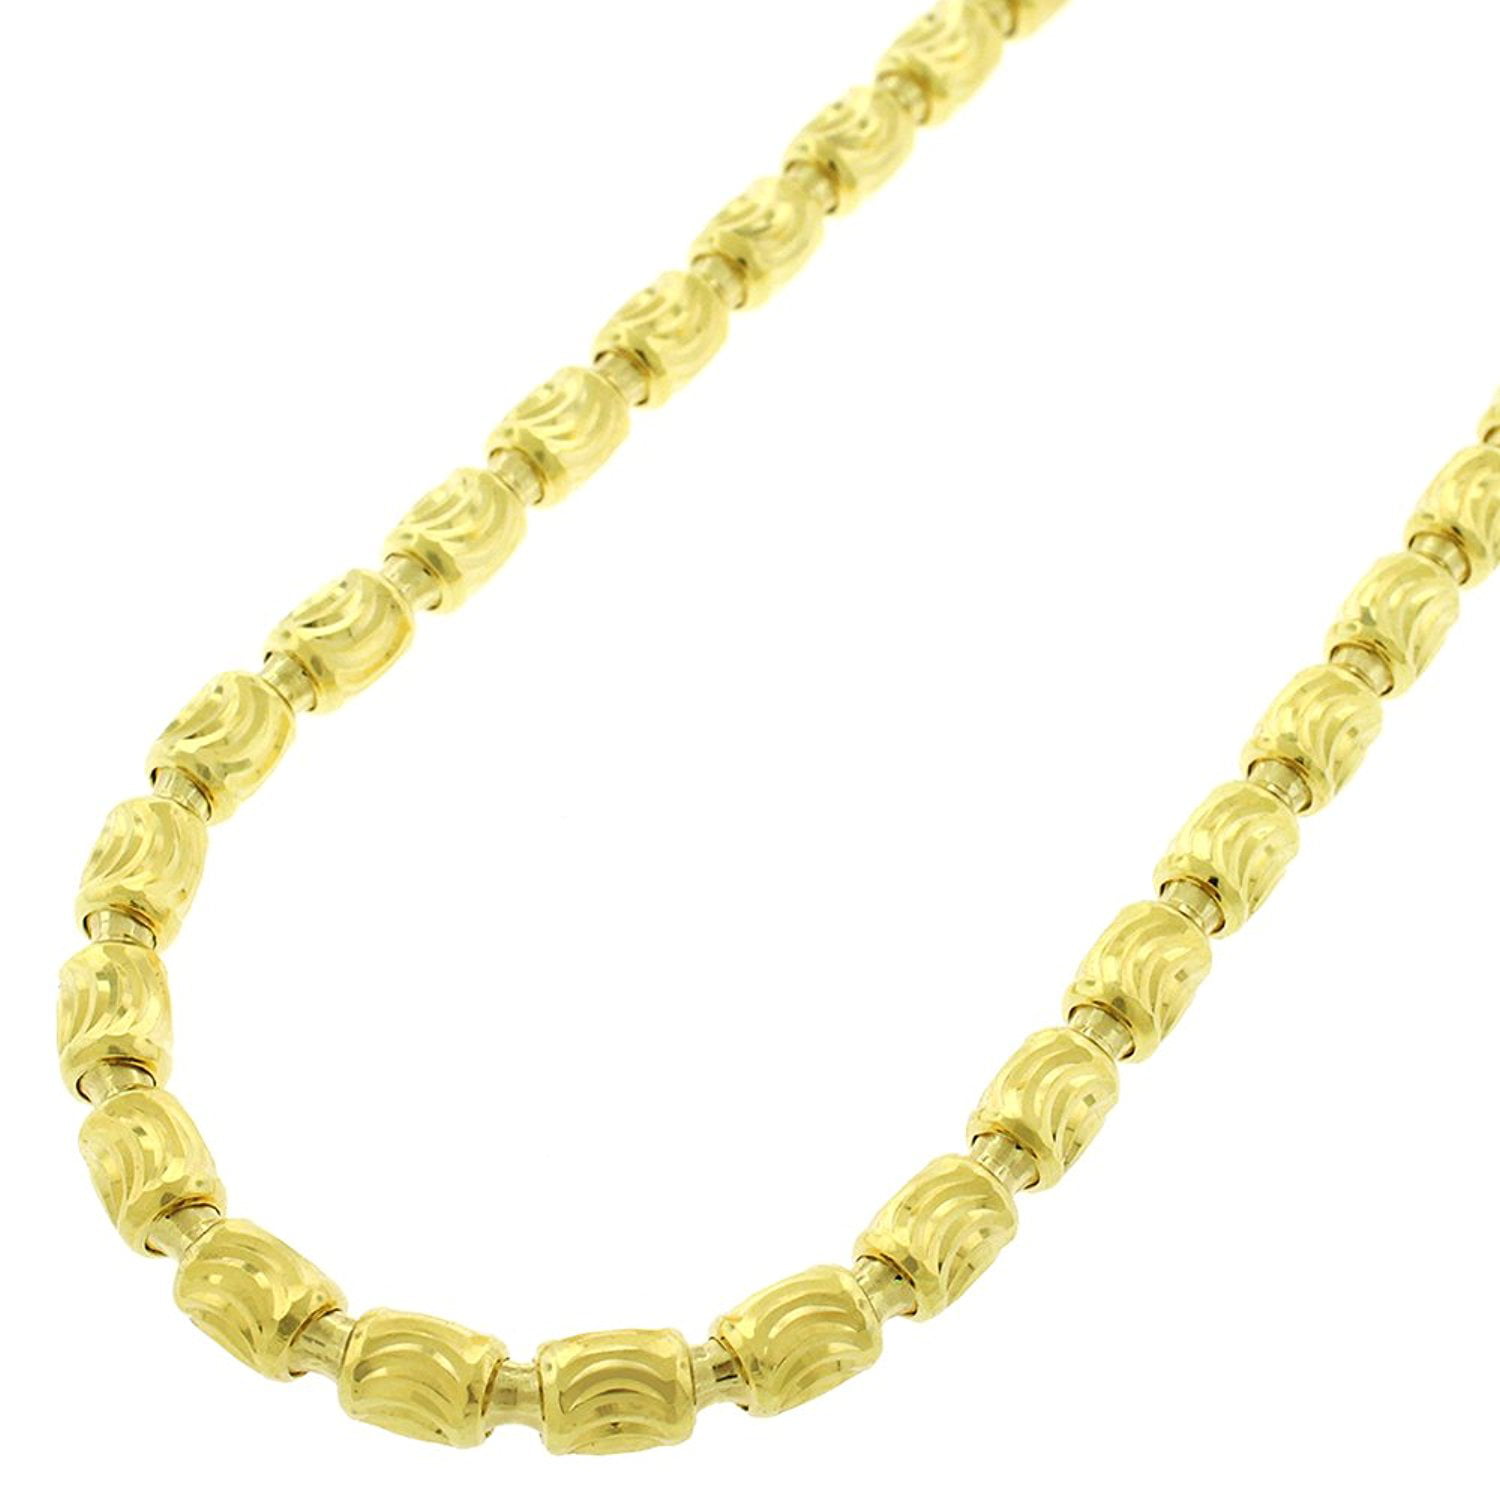 Solid 4mm Ball Bead Mooncut Chain High Polish Gold Tone 24 inches Necklace 